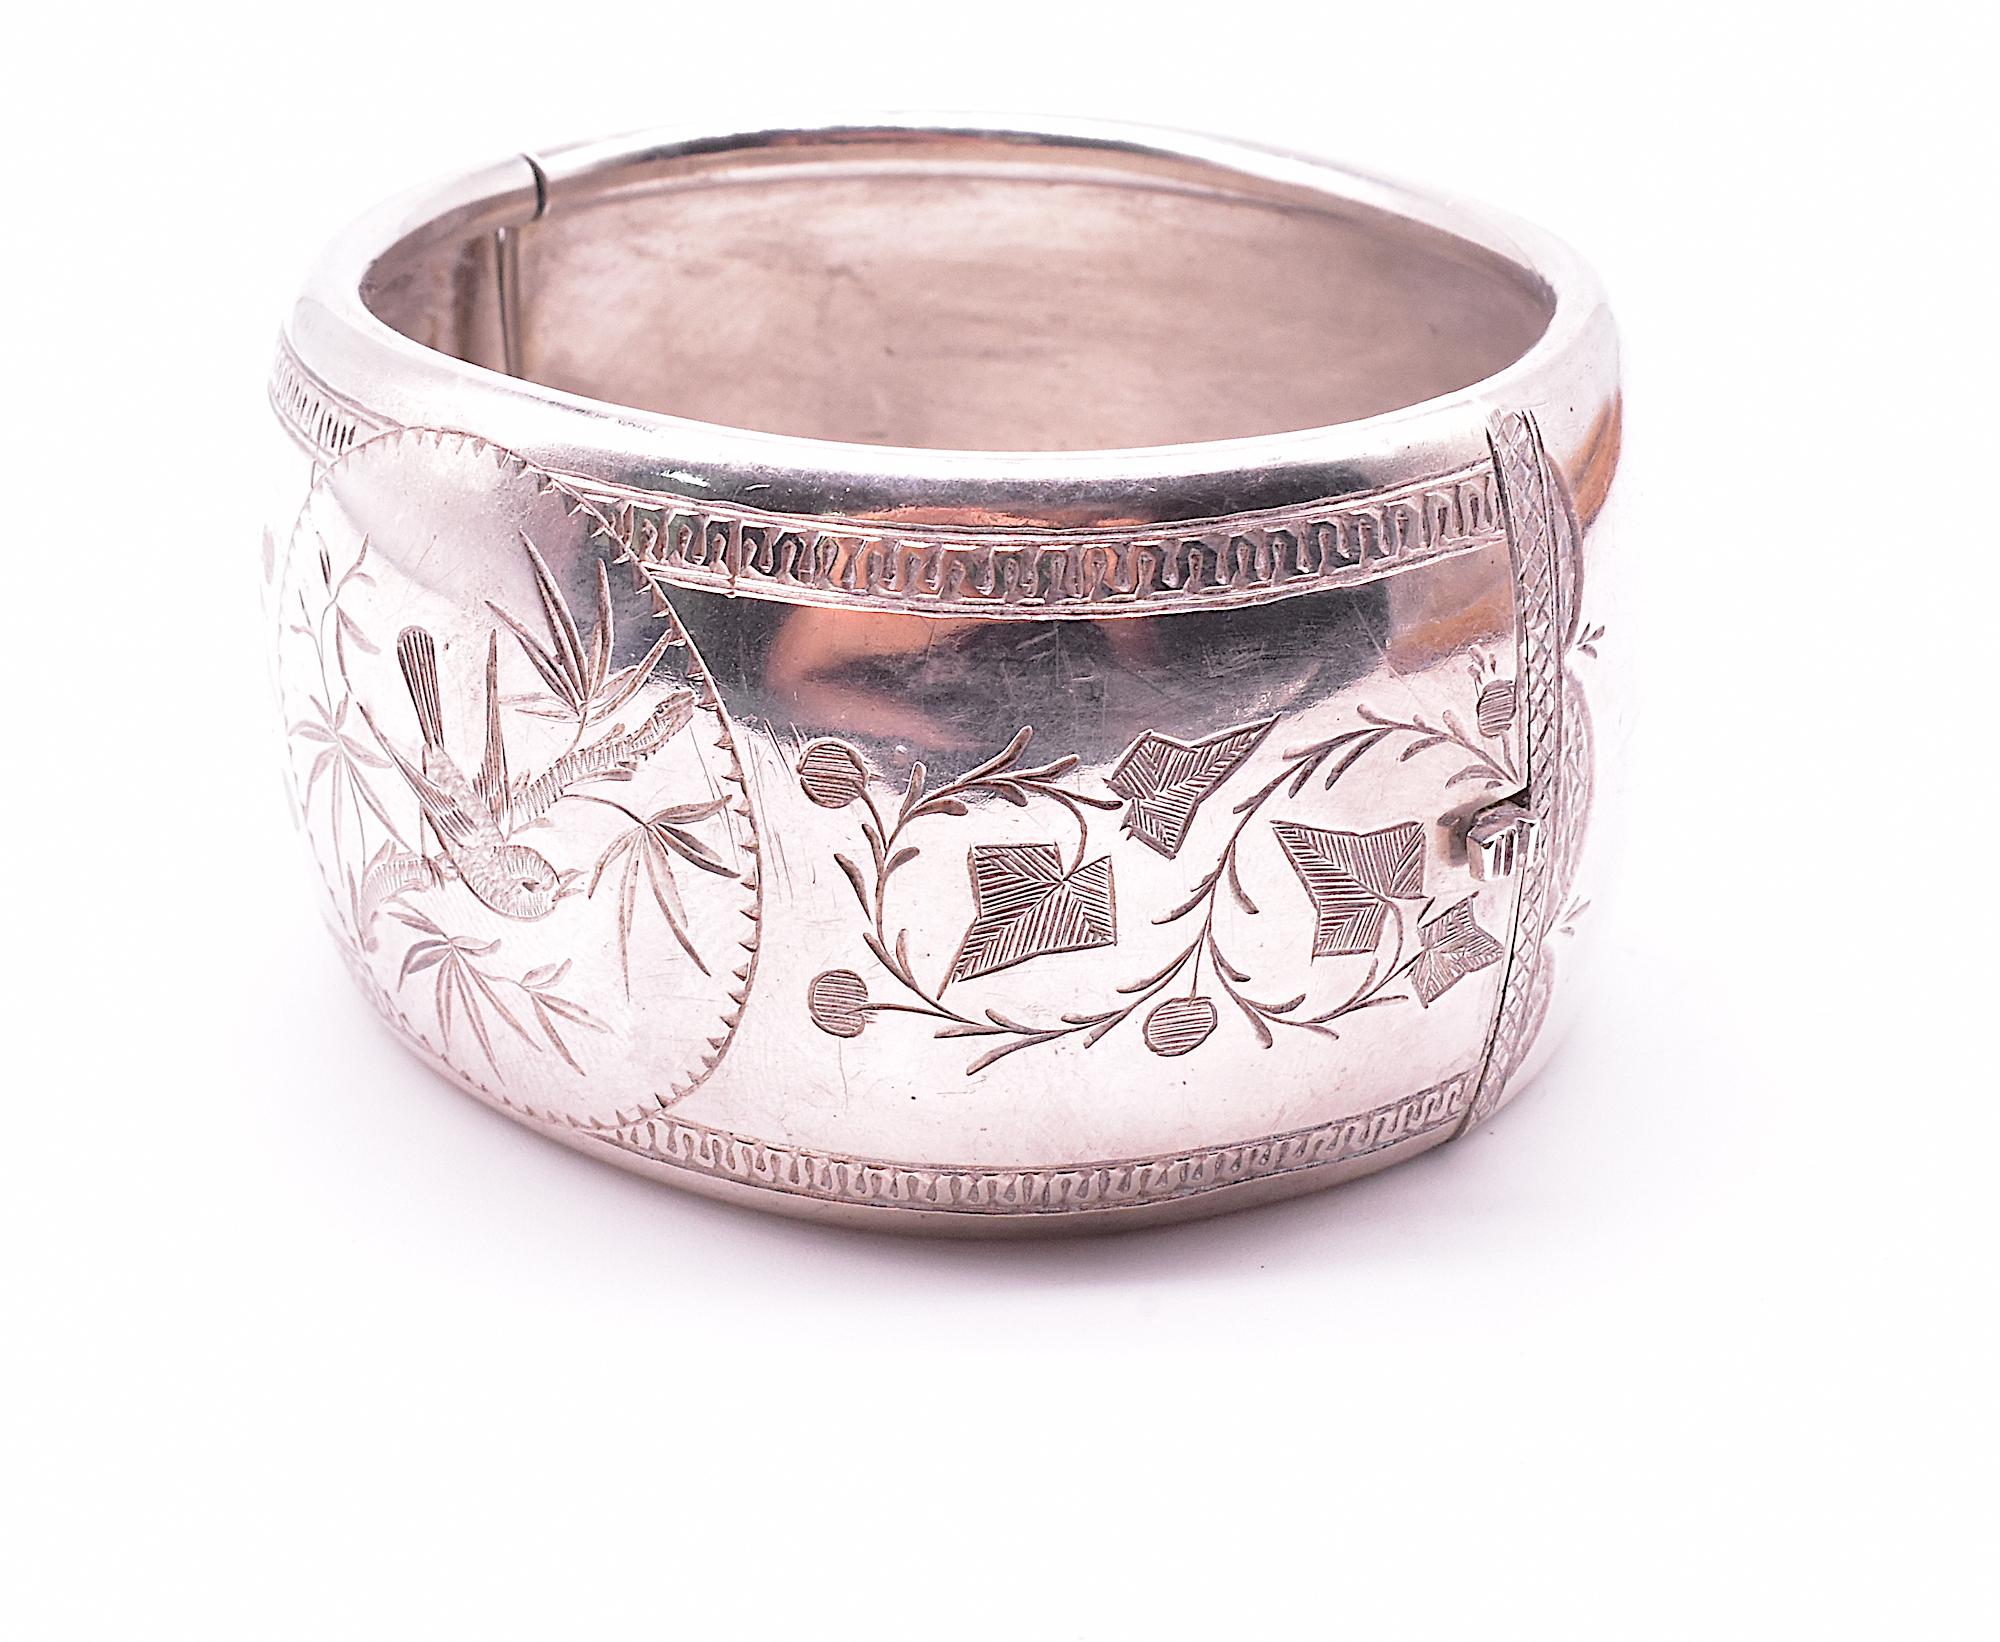 Substantial silver bangle bracelet with a stylized 